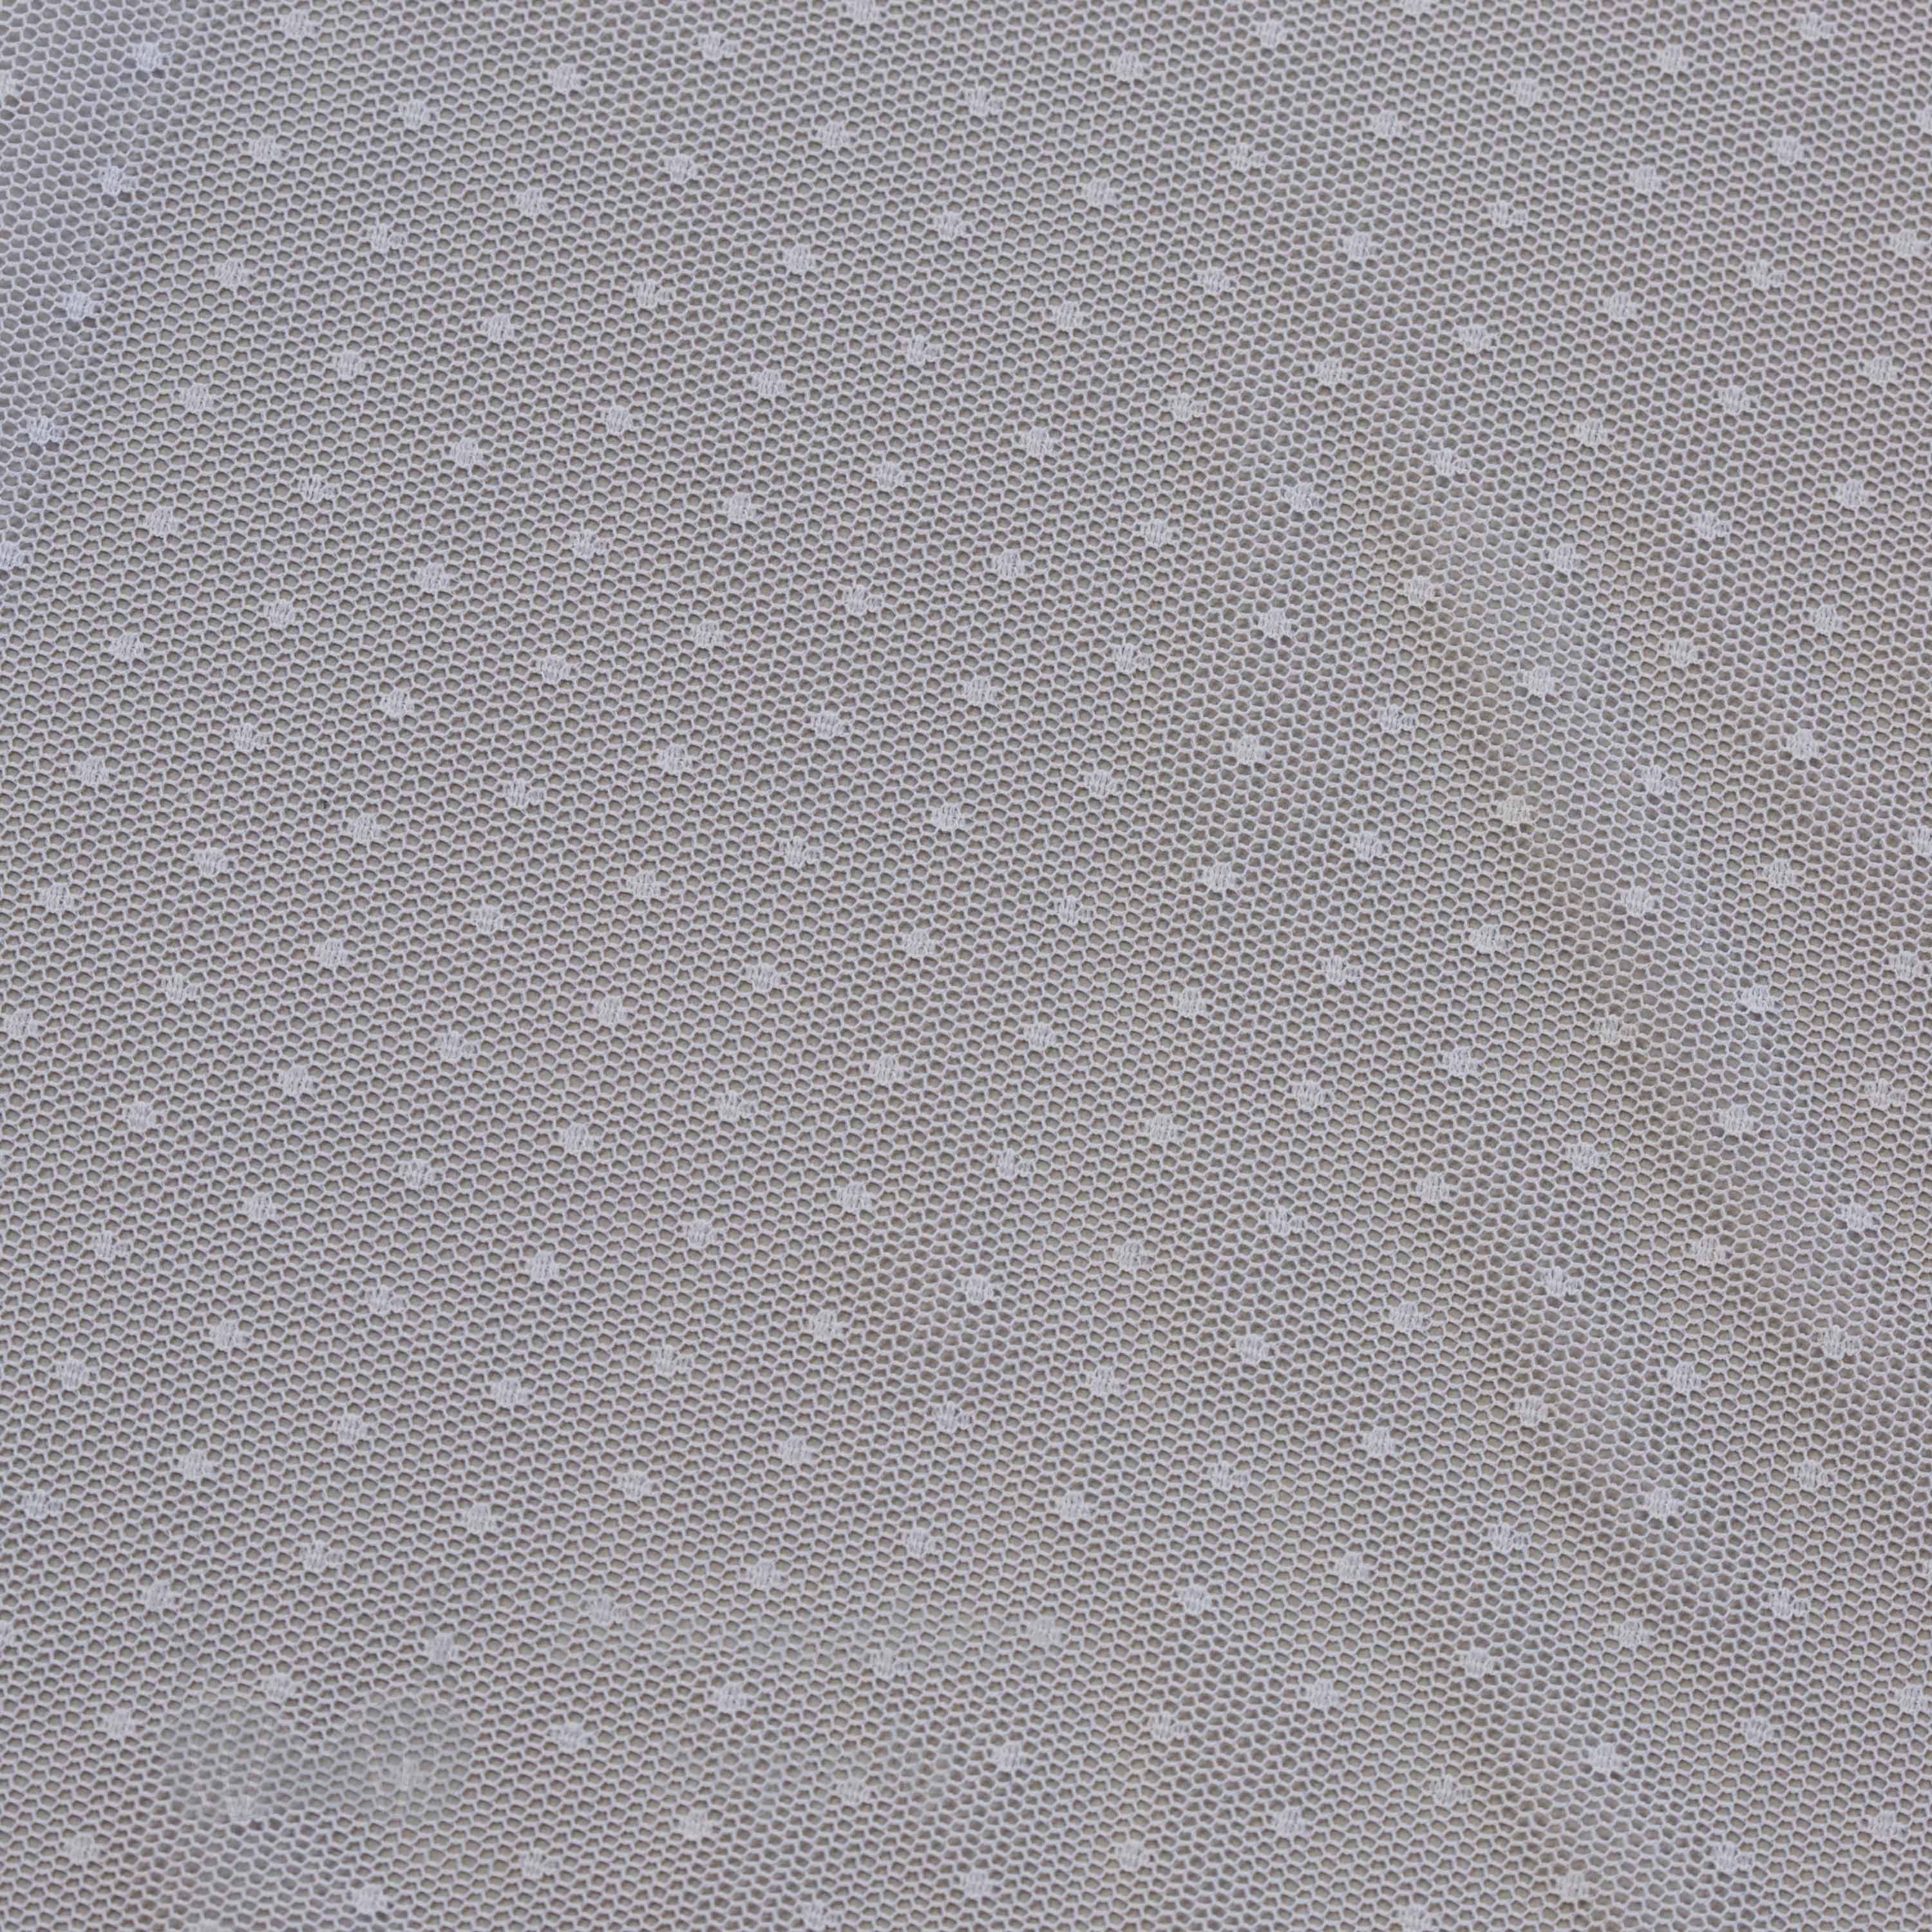 swiss dot tulle fabric FM-3583 white from Bra-Makers Supply flat shown